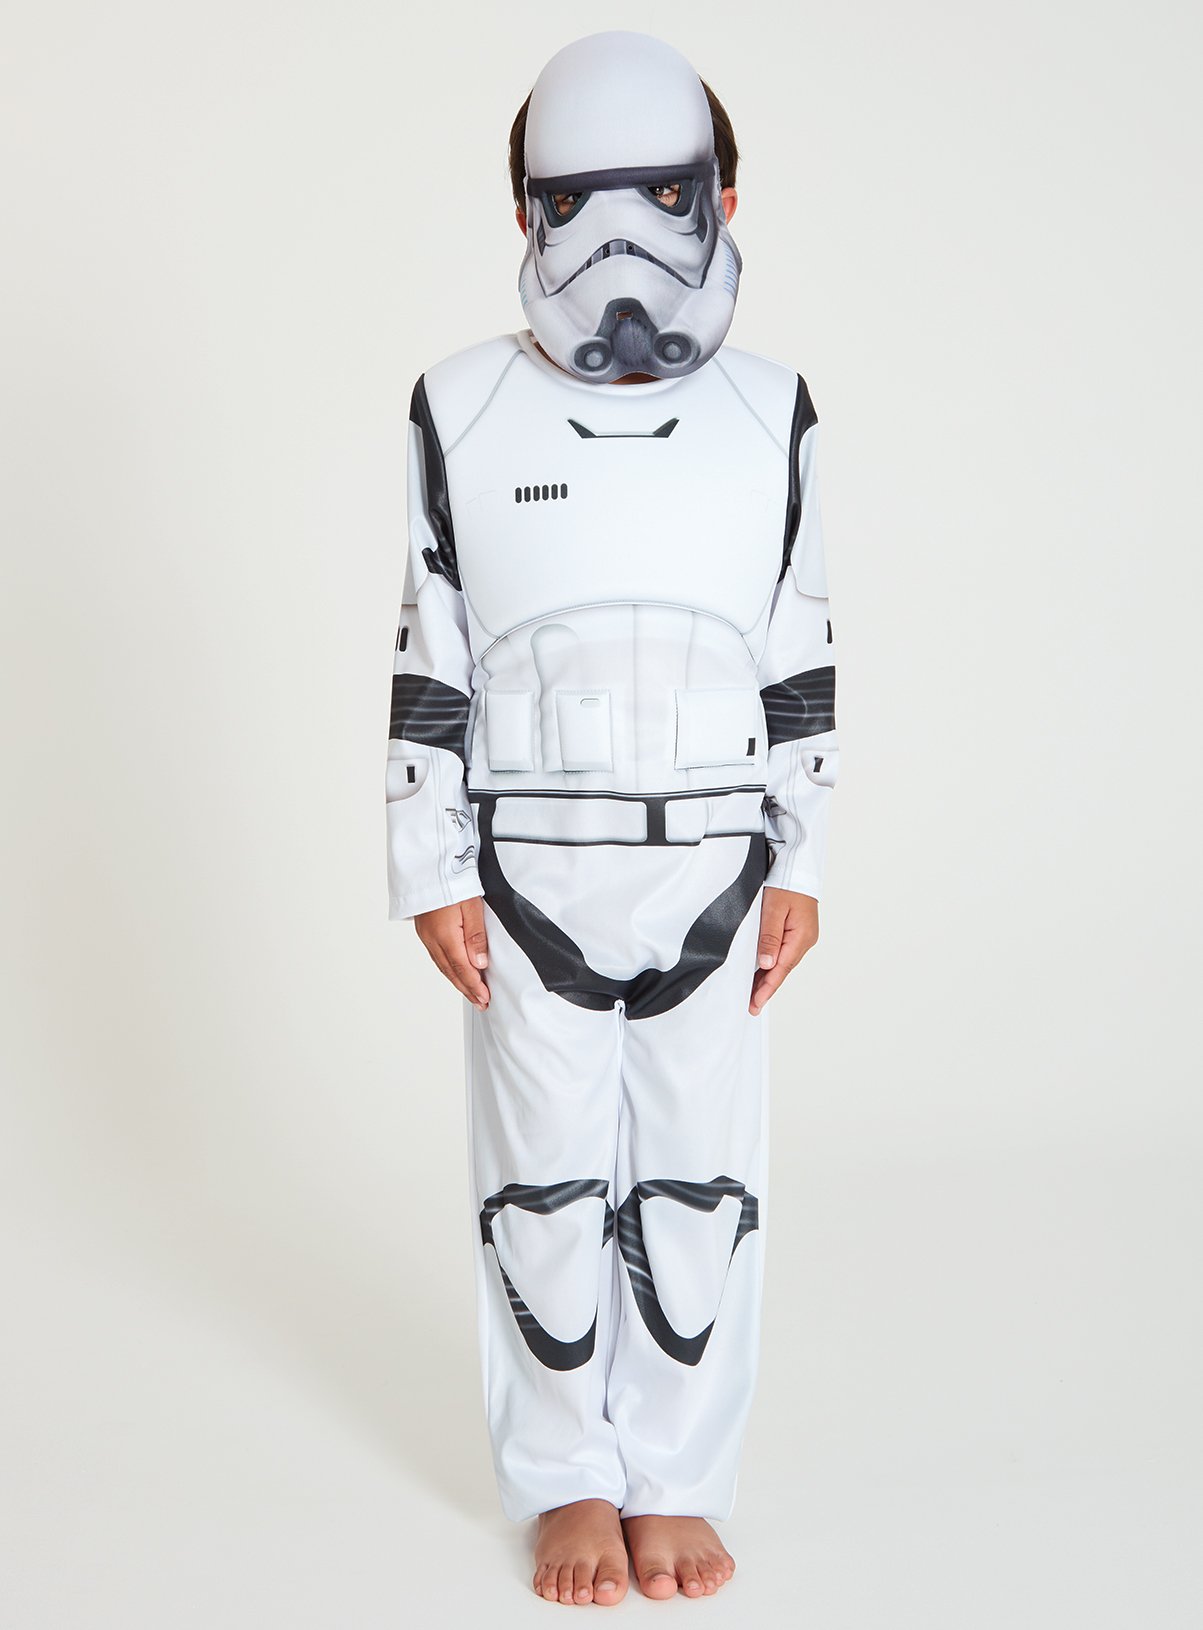 Star Wars Stormtrooper White Costume Review